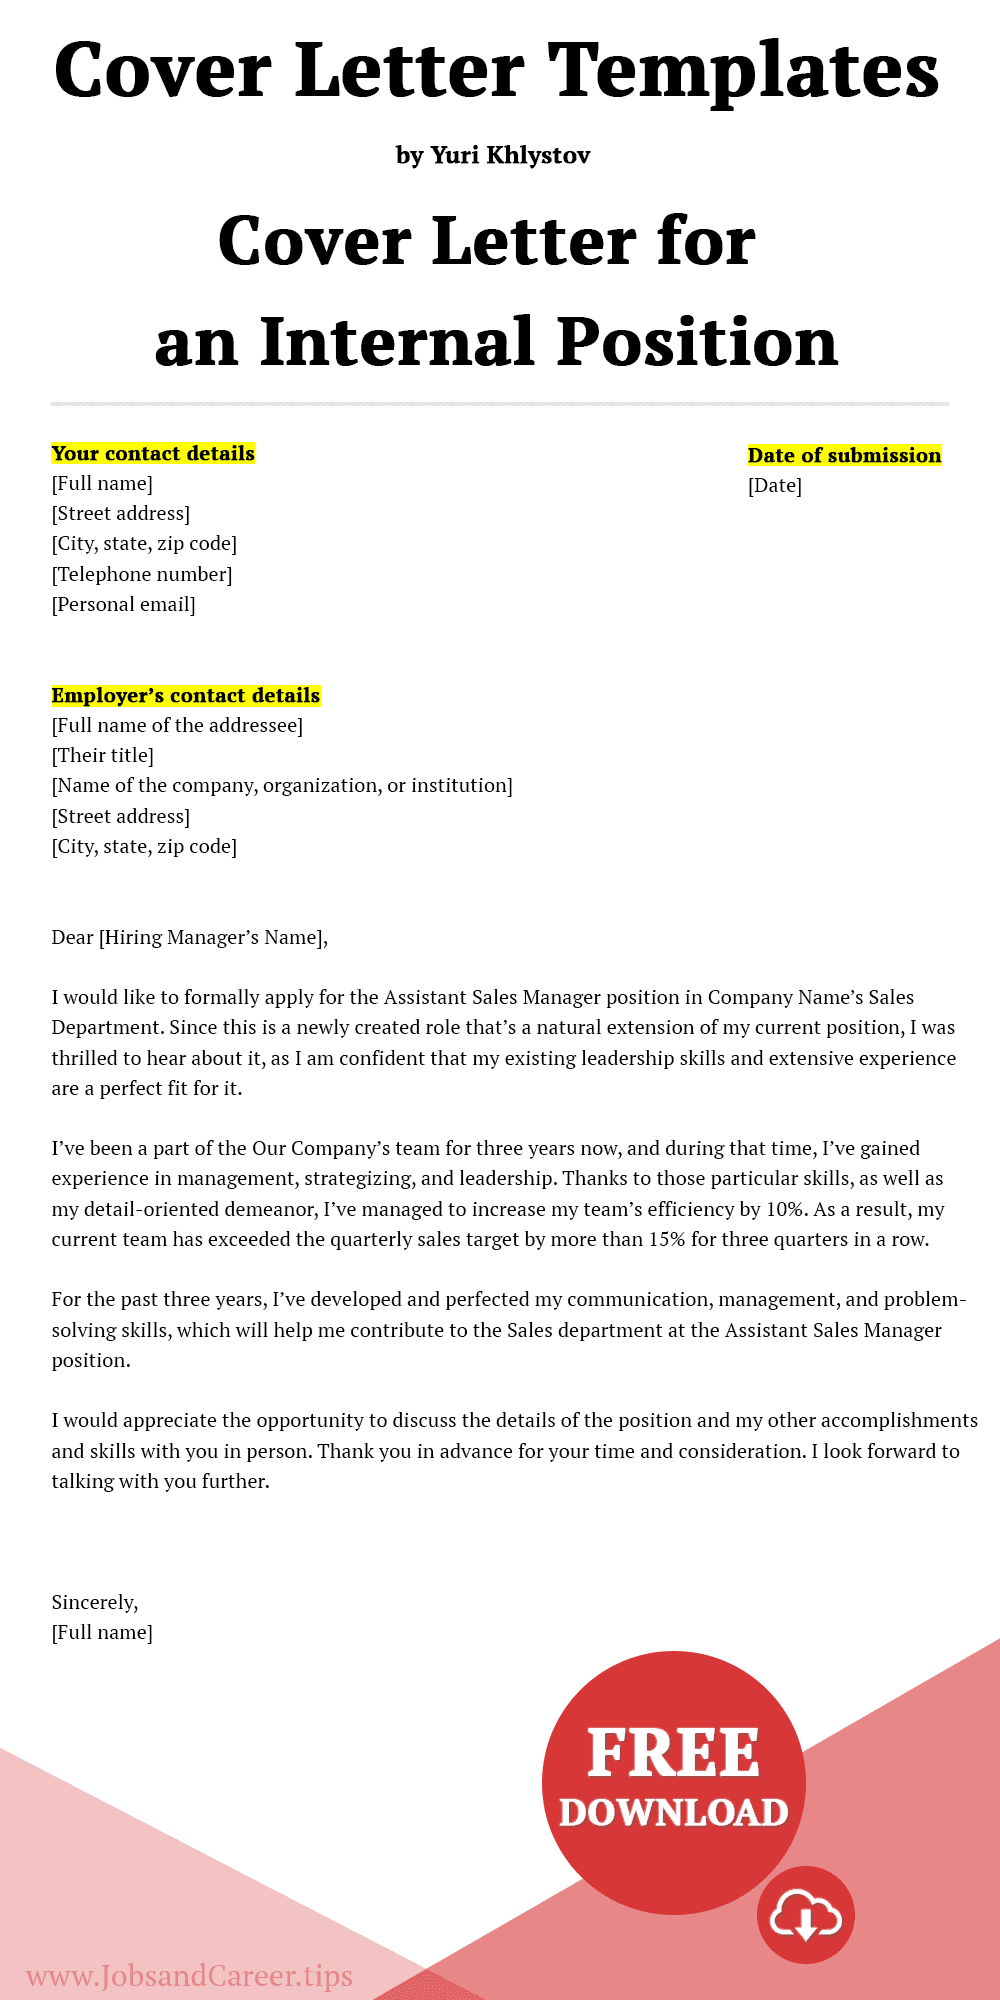 cover letter template internal position